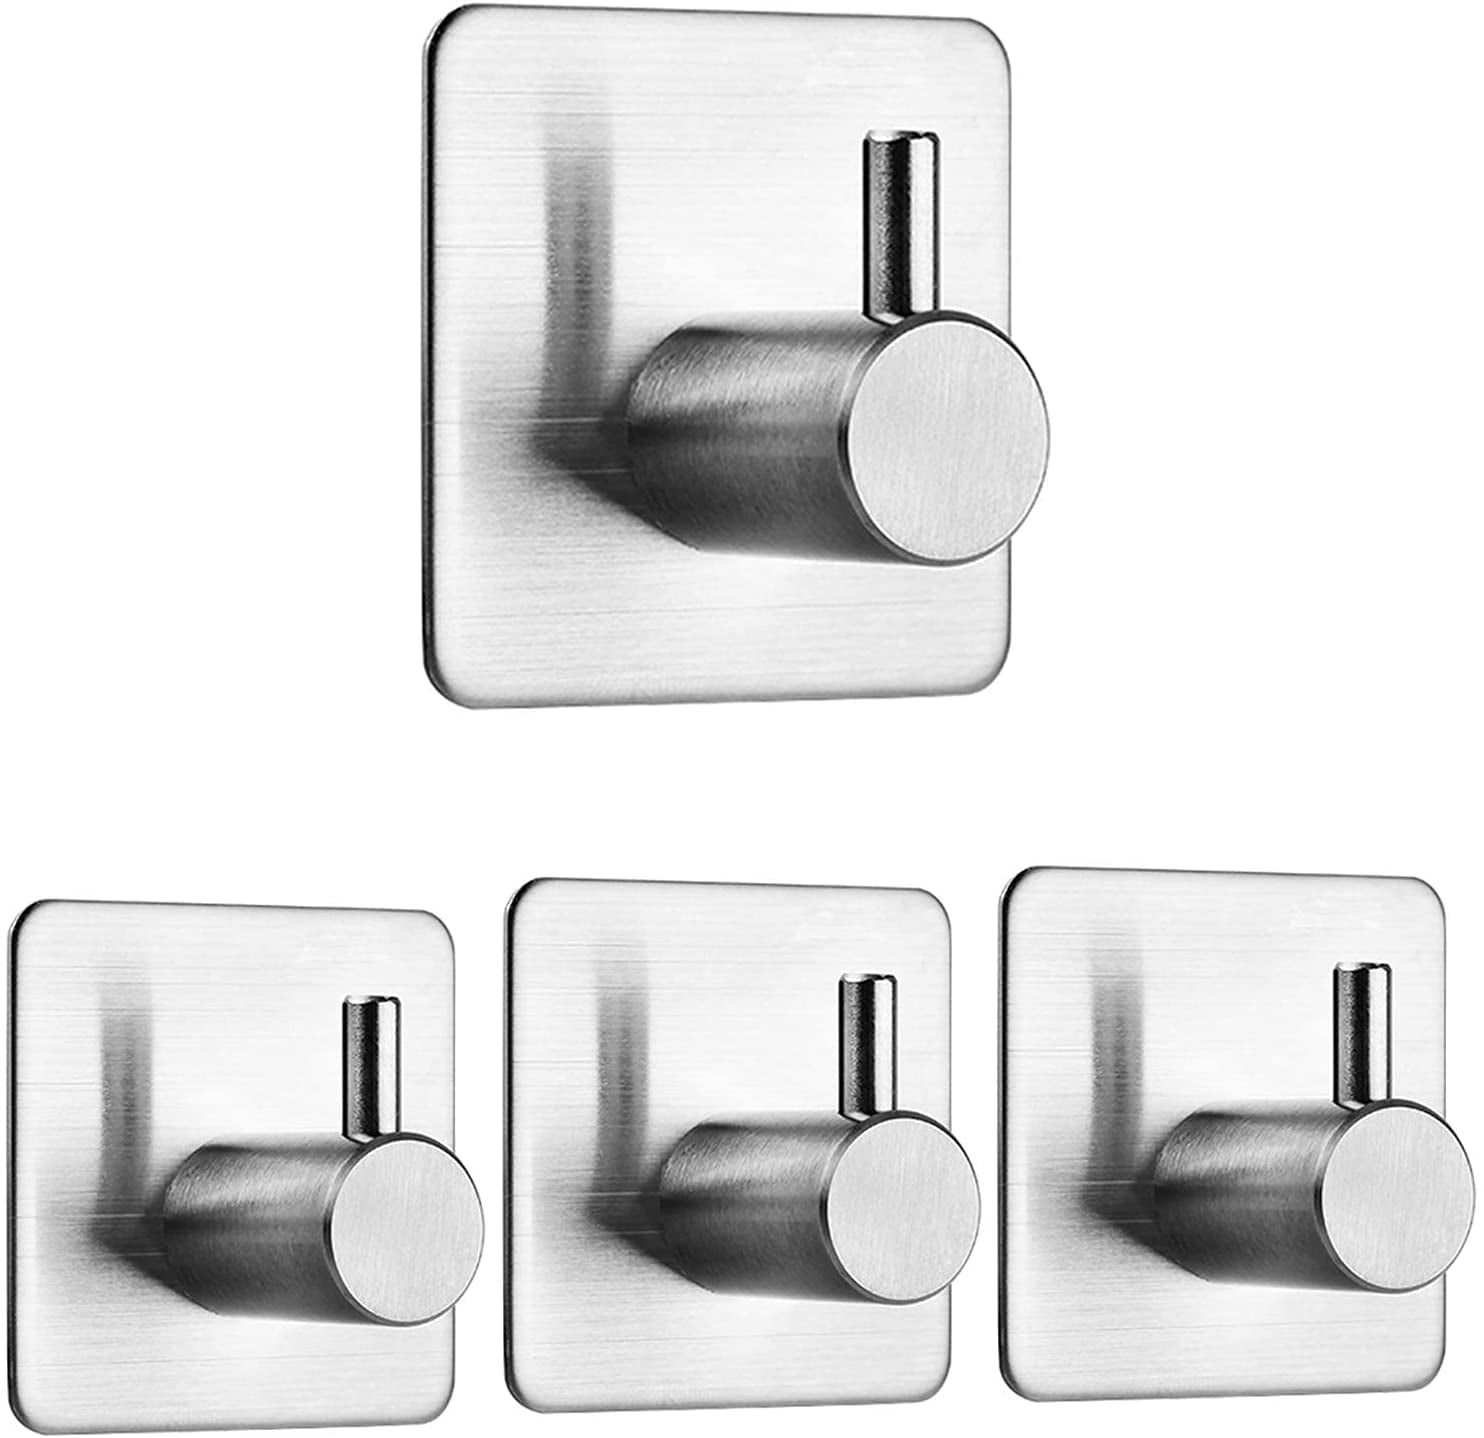 Quality Self Adhesive Hooks Packs Strong Sticky Kitchen Bathroom MULTI USE 